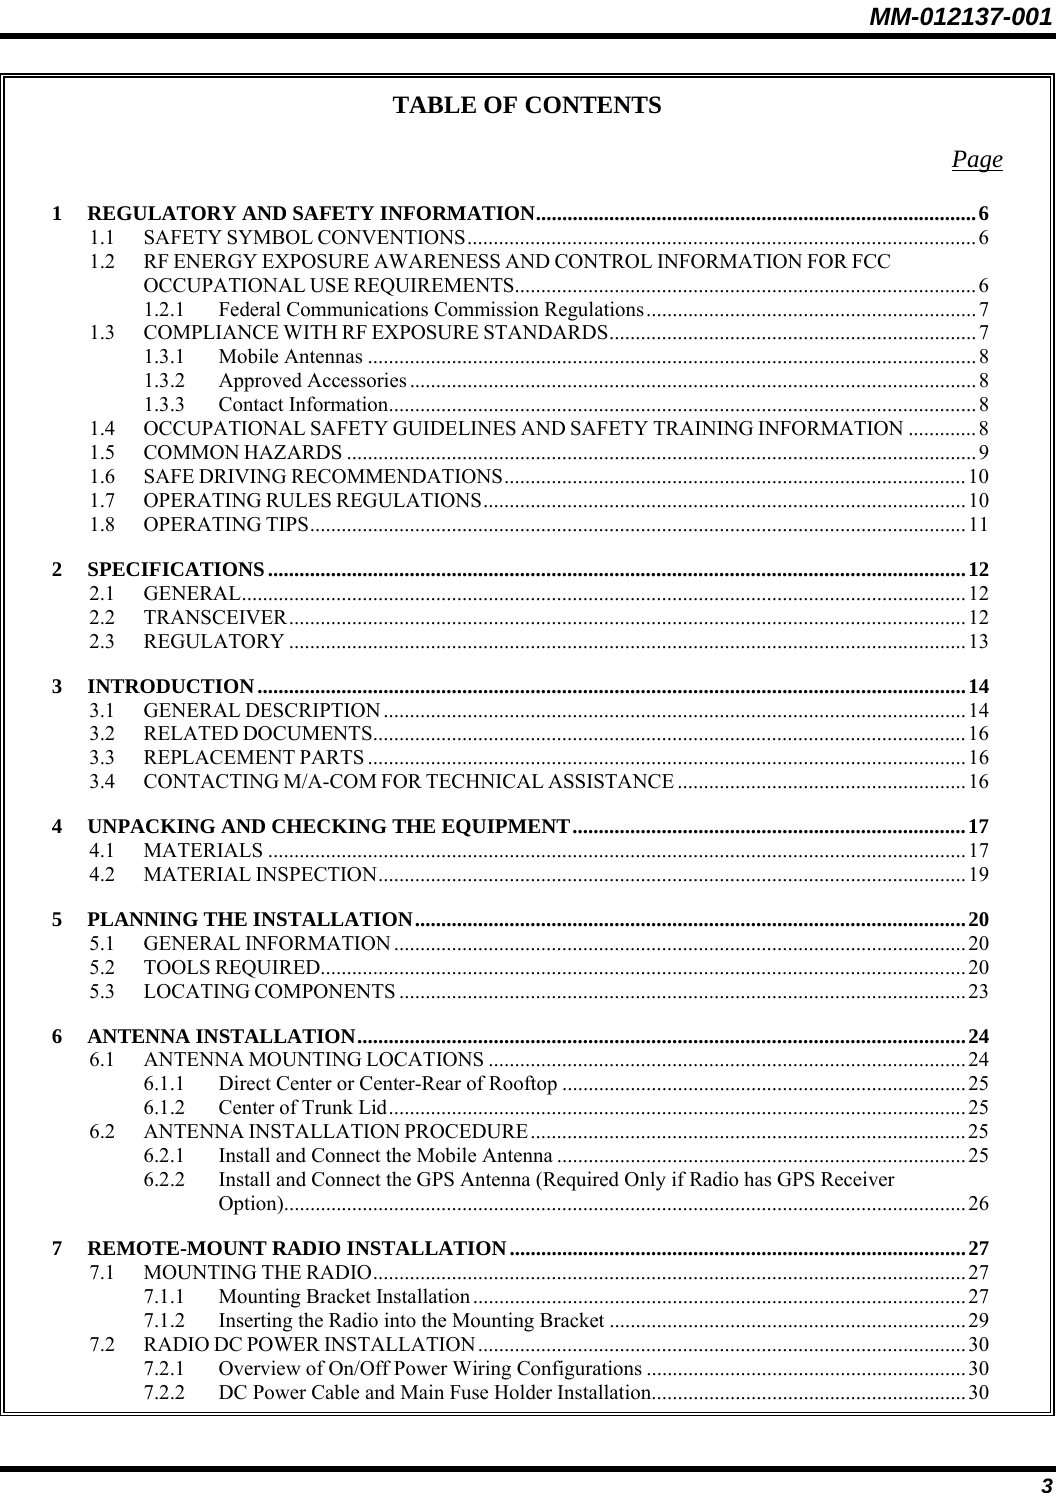 MM-012137-001 3 TABLE OF CONTENTS Page 1 REGULATORY AND SAFETY INFORMATION....................................................................................6 1.1 SAFETY SYMBOL CONVENTIONS.................................................................................................6 1.2 RF ENERGY EXPOSURE AWARENESS AND CONTROL INFORMATION FOR FCC OCCUPATIONAL USE REQUIREMENTS........................................................................................ 6 1.2.1 Federal Communications Commission Regulations...............................................................7 1.3 COMPLIANCE WITH RF EXPOSURE STANDARDS...................................................................... 7 1.3.1 Mobile Antennas ....................................................................................................................8 1.3.2 Approved Accessories............................................................................................................8 1.3.3 Contact Information................................................................................................................8 1.4 OCCUPATIONAL SAFETY GUIDELINES AND SAFETY TRAINING INFORMATION .............8 1.5 COMMON HAZARDS ........................................................................................................................9 1.6 SAFE DRIVING RECOMMENDATIONS........................................................................................10 1.7 OPERATING RULES REGULATIONS............................................................................................ 10 1.8 OPERATING TIPS............................................................................................................................. 11 2 SPECIFICATIONS.....................................................................................................................................12 2.1 GENERAL..........................................................................................................................................12 2.2 TRANSCEIVER.................................................................................................................................12 2.3 REGULATORY .................................................................................................................................13 3 INTRODUCTION.......................................................................................................................................14 3.1 GENERAL DESCRIPTION ...............................................................................................................14 3.2 RELATED DOCUMENTS.................................................................................................................16 3.3 REPLACEMENT PARTS ..................................................................................................................16 3.4 CONTACTING M/A-COM FOR TECHNICAL ASSISTANCE .......................................................16 4 UNPACKING AND CHECKING THE EQUIPMENT...........................................................................17 4.1 MATERIALS .....................................................................................................................................17 4.2 MATERIAL INSPECTION................................................................................................................ 19 5 PLANNING THE INSTALLATION.........................................................................................................20 5.1 GENERAL INFORMATION .............................................................................................................20 5.2 TOOLS REQUIRED...........................................................................................................................20 5.3 LOCATING COMPONENTS ............................................................................................................23 6 ANTENNA INSTALLATION....................................................................................................................24 6.1 ANTENNA MOUNTING LOCATIONS ...........................................................................................24 6.1.1 Direct Center or Center-Rear of Rooftop .............................................................................25 6.1.2 Center of Trunk Lid..............................................................................................................25 6.2 ANTENNA INSTALLATION PROCEDURE...................................................................................25 6.2.1 Install and Connect the Mobile Antenna ..............................................................................25 6.2.2 Install and Connect the GPS Antenna (Required Only if Radio has GPS Receiver Option)..................................................................................................................................26 7 REMOTE-MOUNT RADIO INSTALLATION.......................................................................................27 7.1 MOUNTING THE RADIO.................................................................................................................27 7.1.1 Mounting Bracket Installation ..............................................................................................27 7.1.2 Inserting the Radio into the Mounting Bracket ....................................................................29 7.2 RADIO DC POWER INSTALLATION............................................................................................. 30 7.2.1 Overview of On/Off Power Wiring Configurations ............................................................. 30 7.2.2 DC Power Cable and Main Fuse Holder Installation............................................................30 